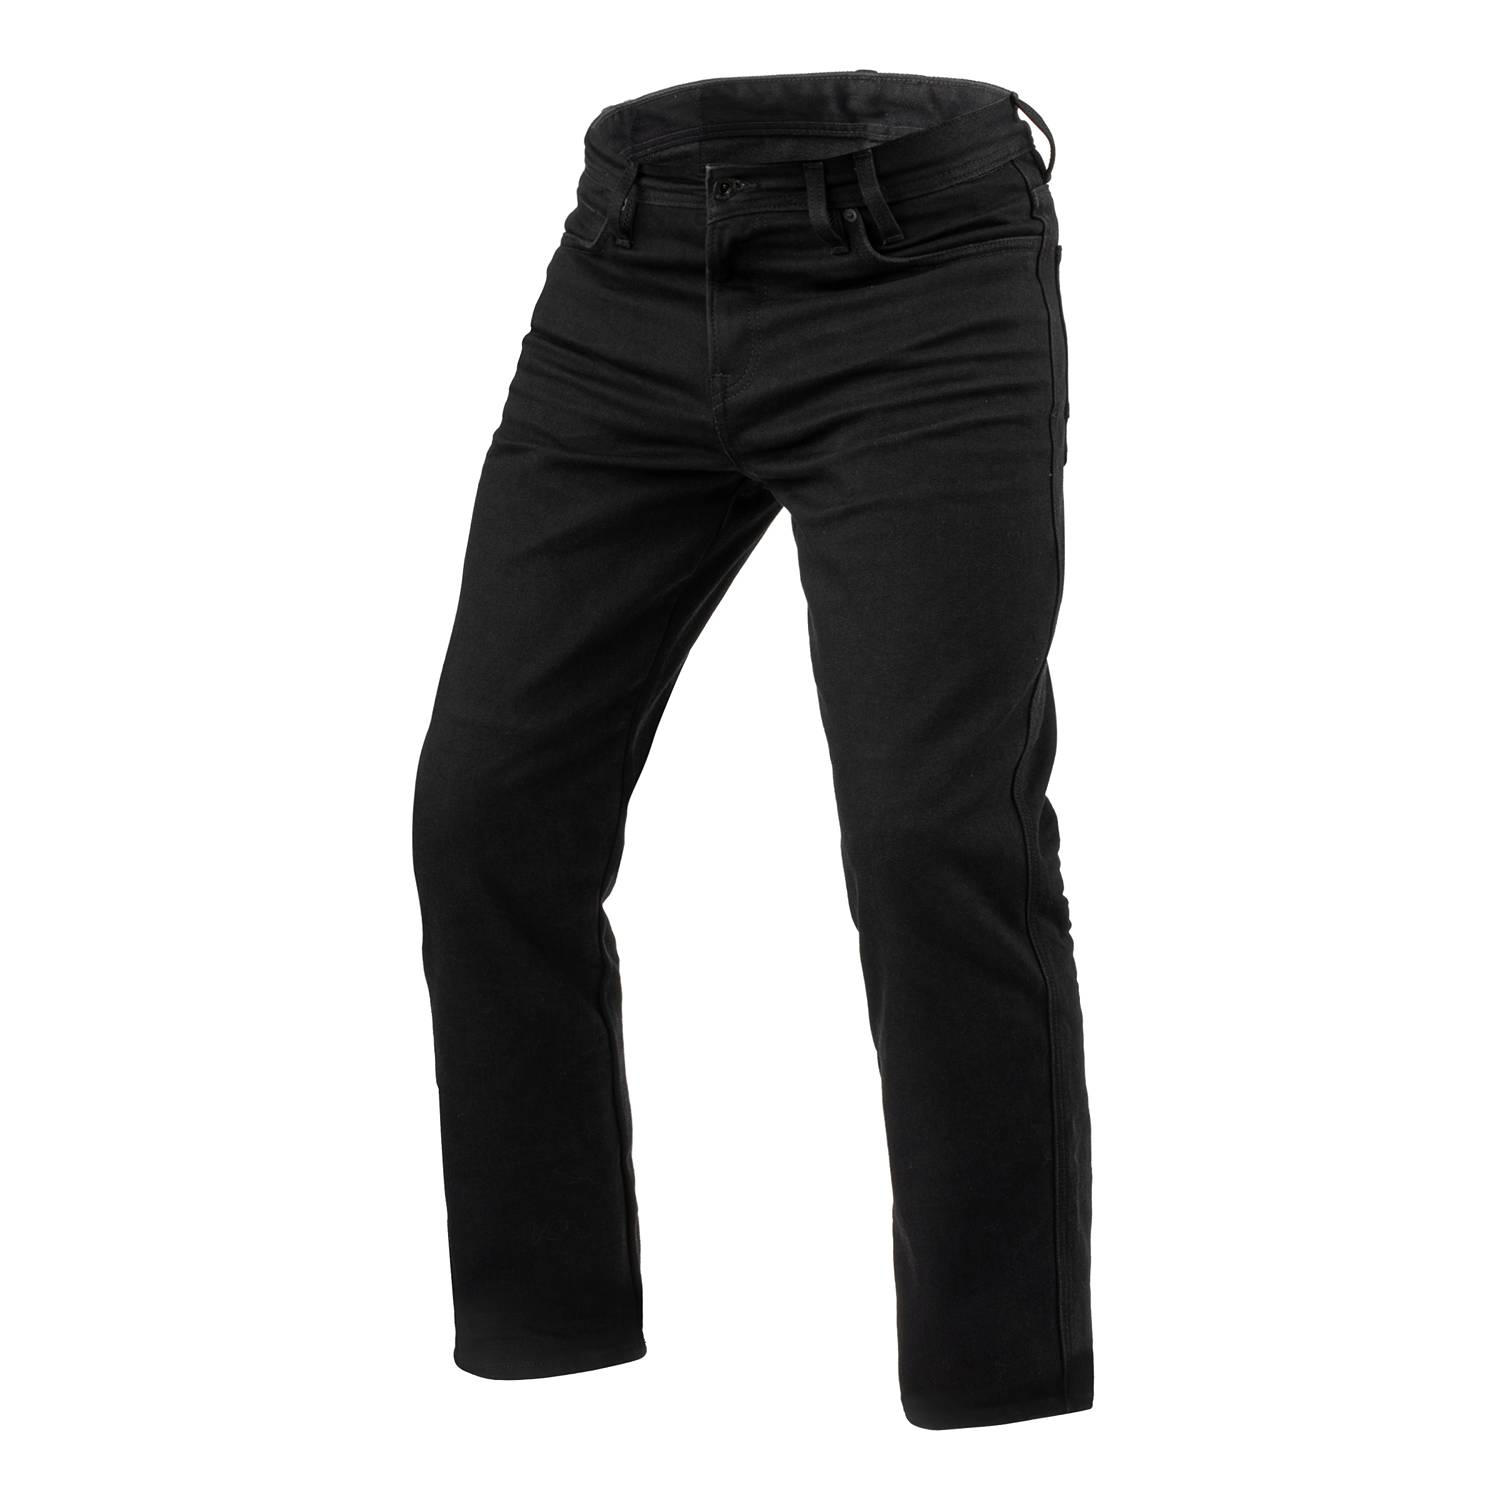 Image of EU REV'IT! Jeans Lombard 3 RF Black L36 Motorcycle Jeans Taille L36/W30